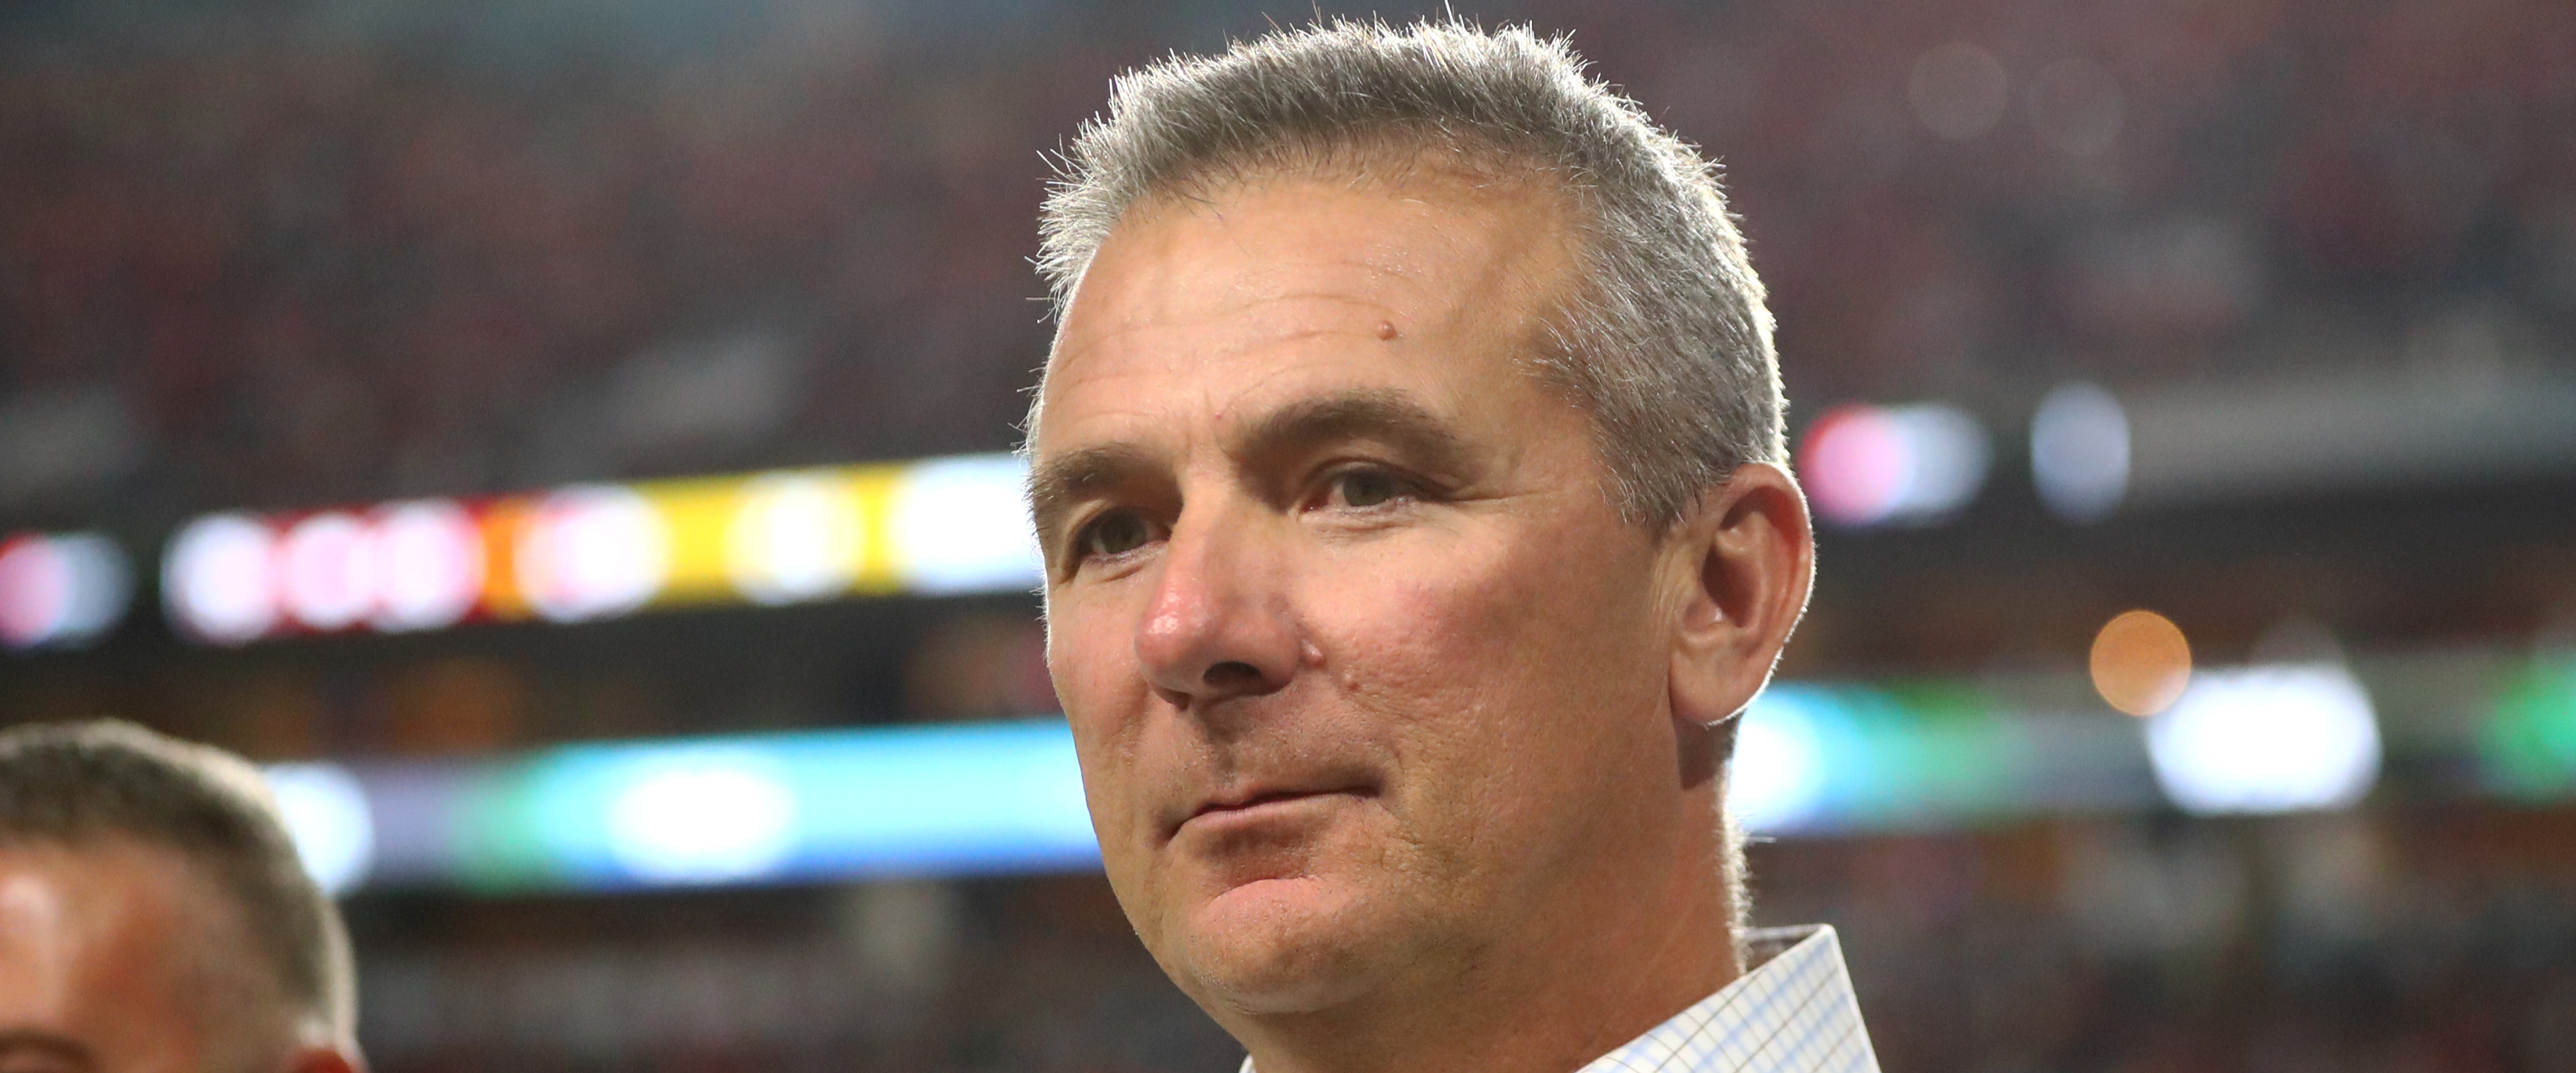 Urban Meyer in the NFL Could be Good for the Patriots